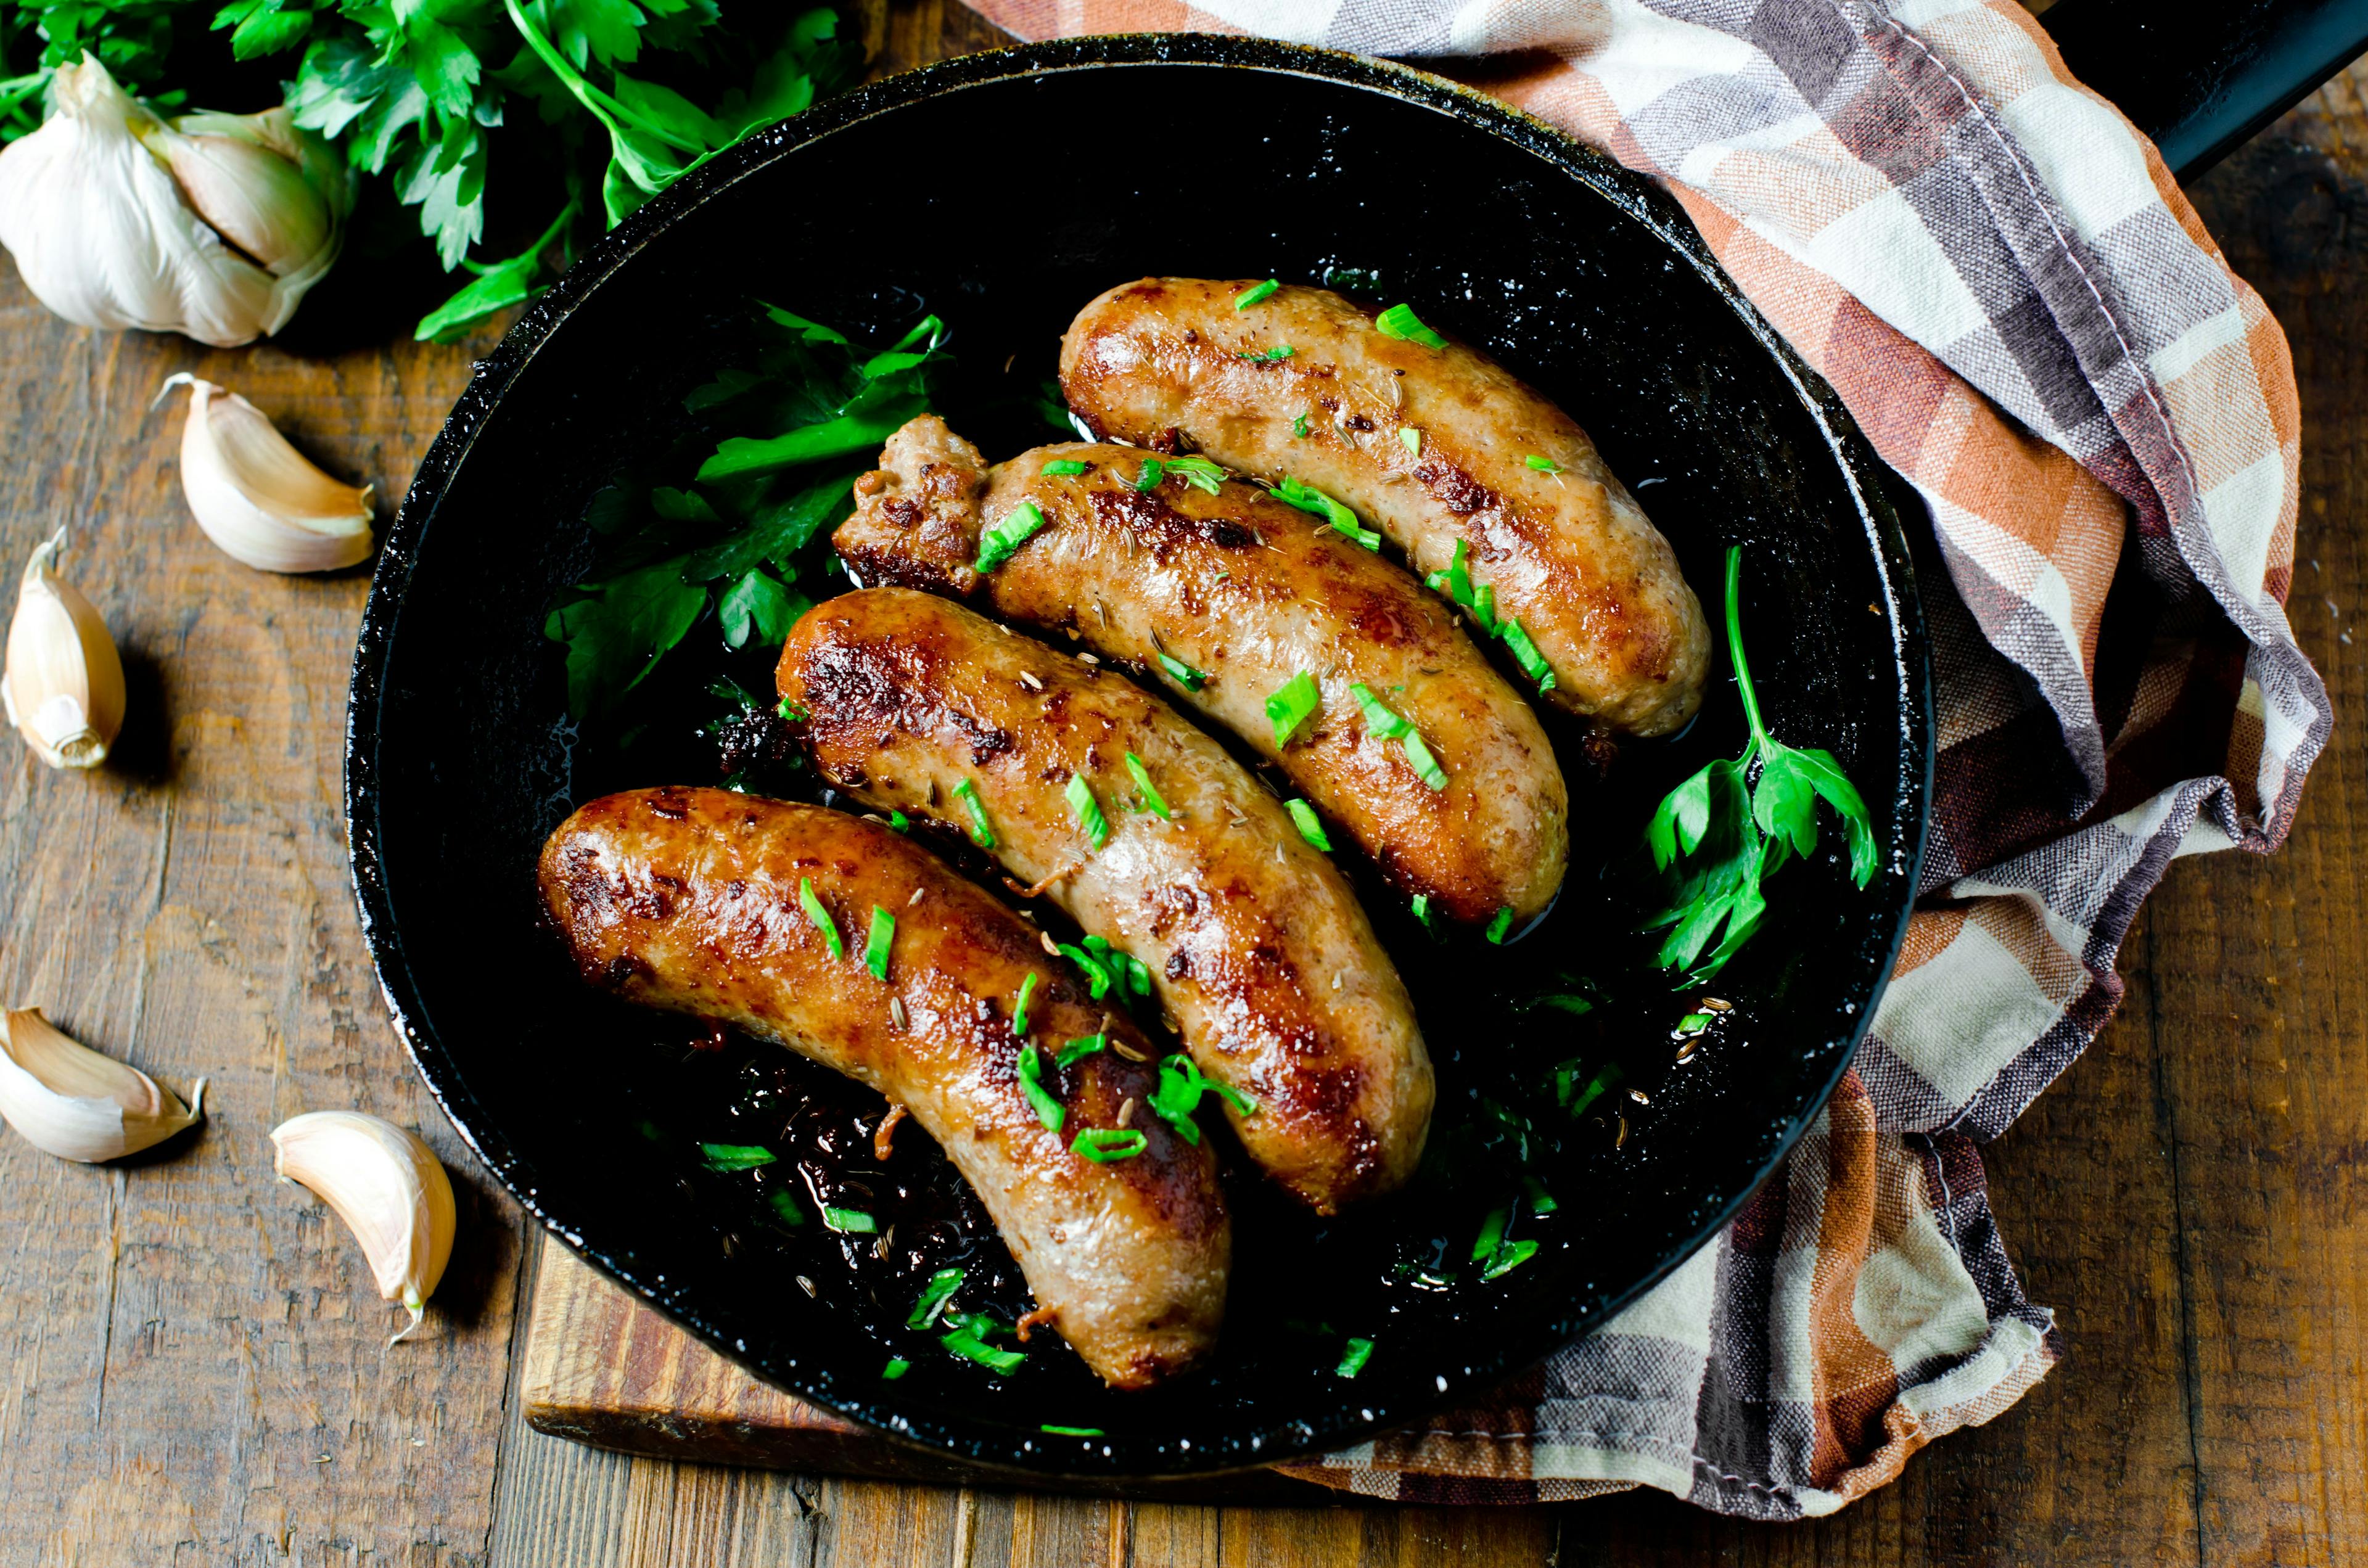 Homemade sausages from turkey (chicken) fried in a frying pan | Image Credit: © teleginatania - stock.adobe.com